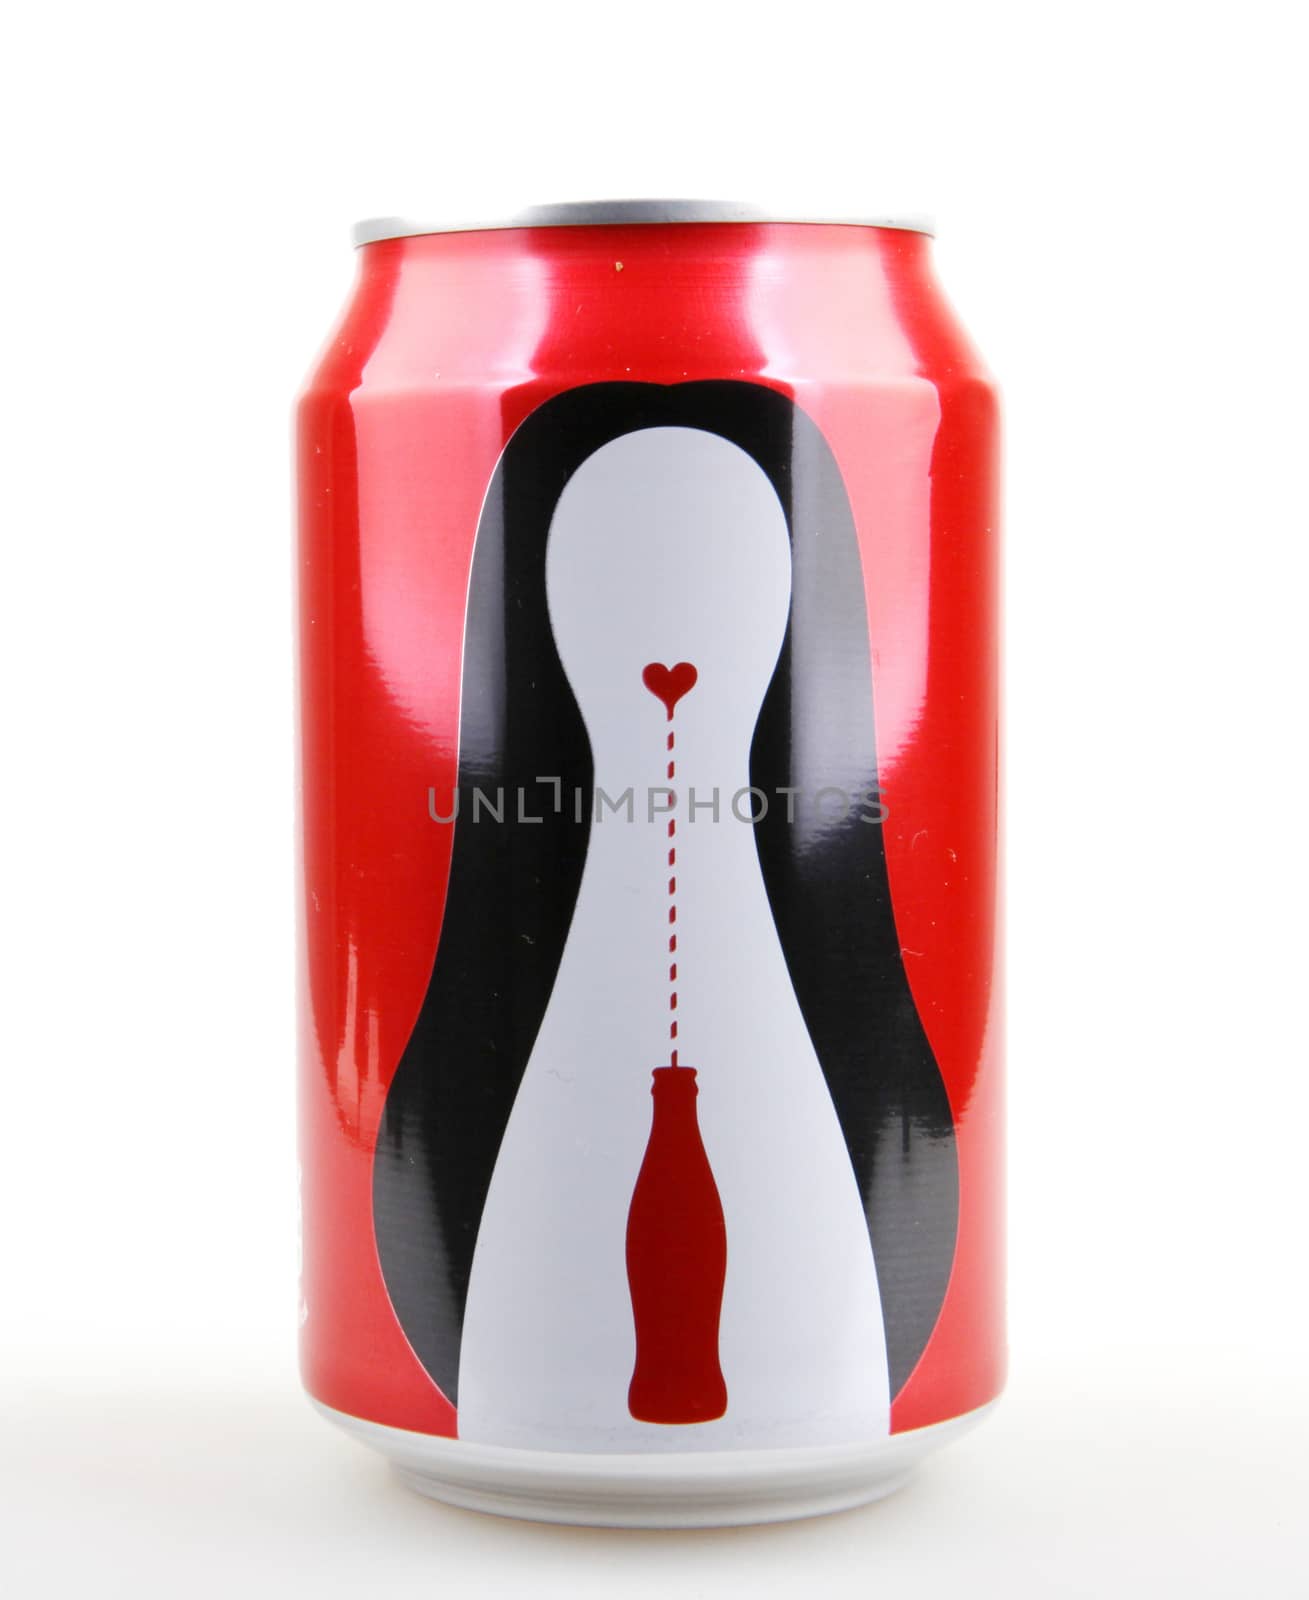 AYTOS, BULGARIA - OCTOBER 04, 2015: Coca-Cola isolated on white background. Coca-Cola is a carbonated soft drink sold in stores, restaurants, and vending machines throughout the world.